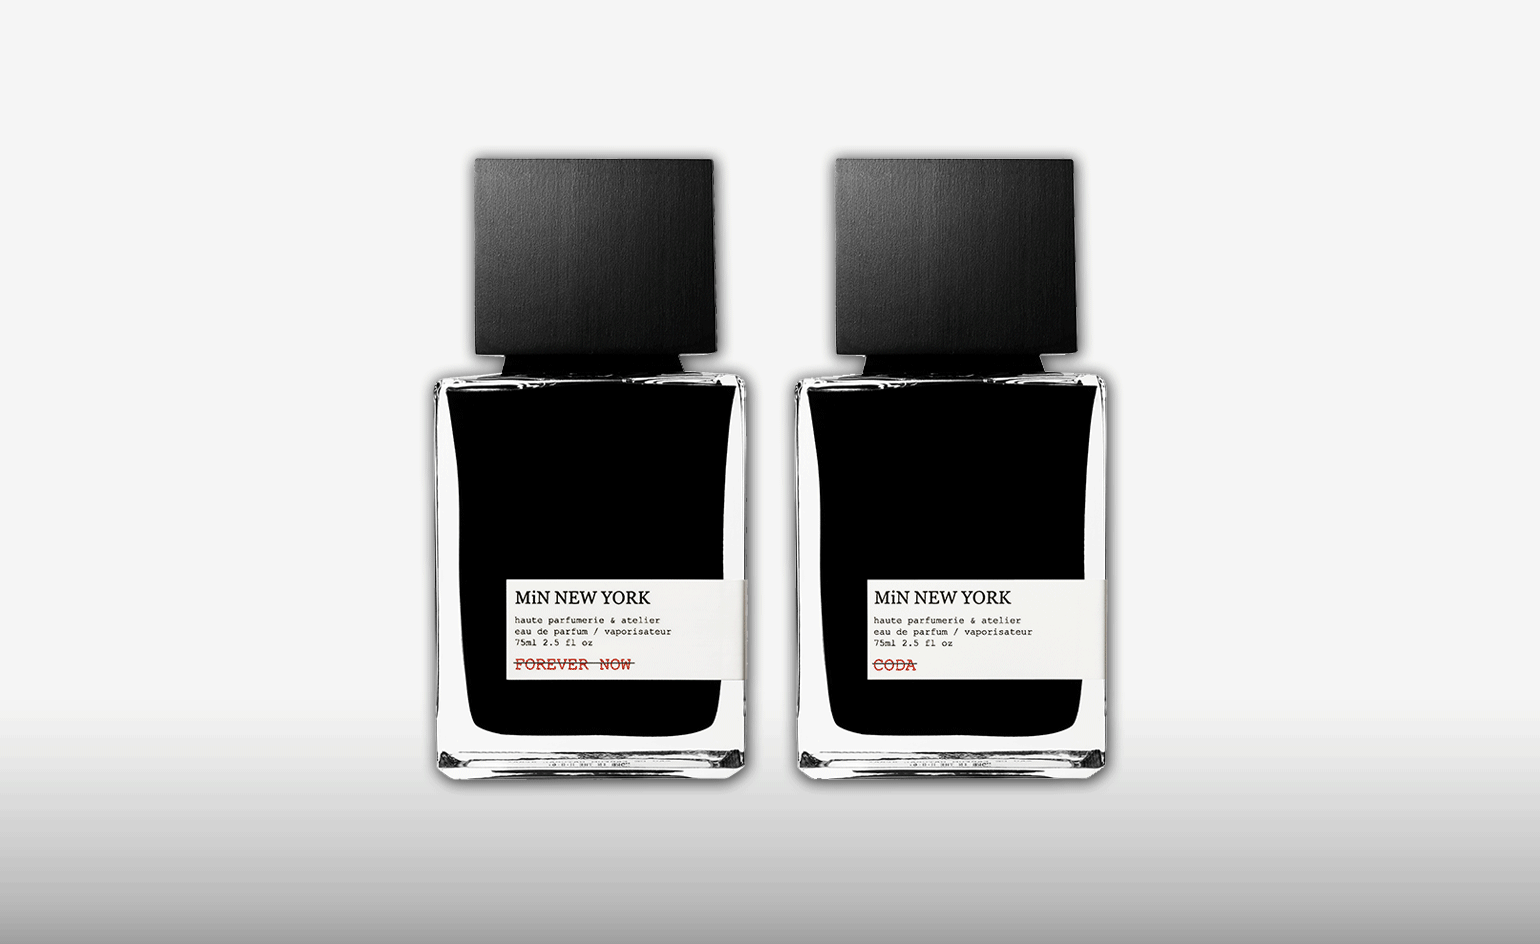 A new volume: MiN New York create a scent for every sense